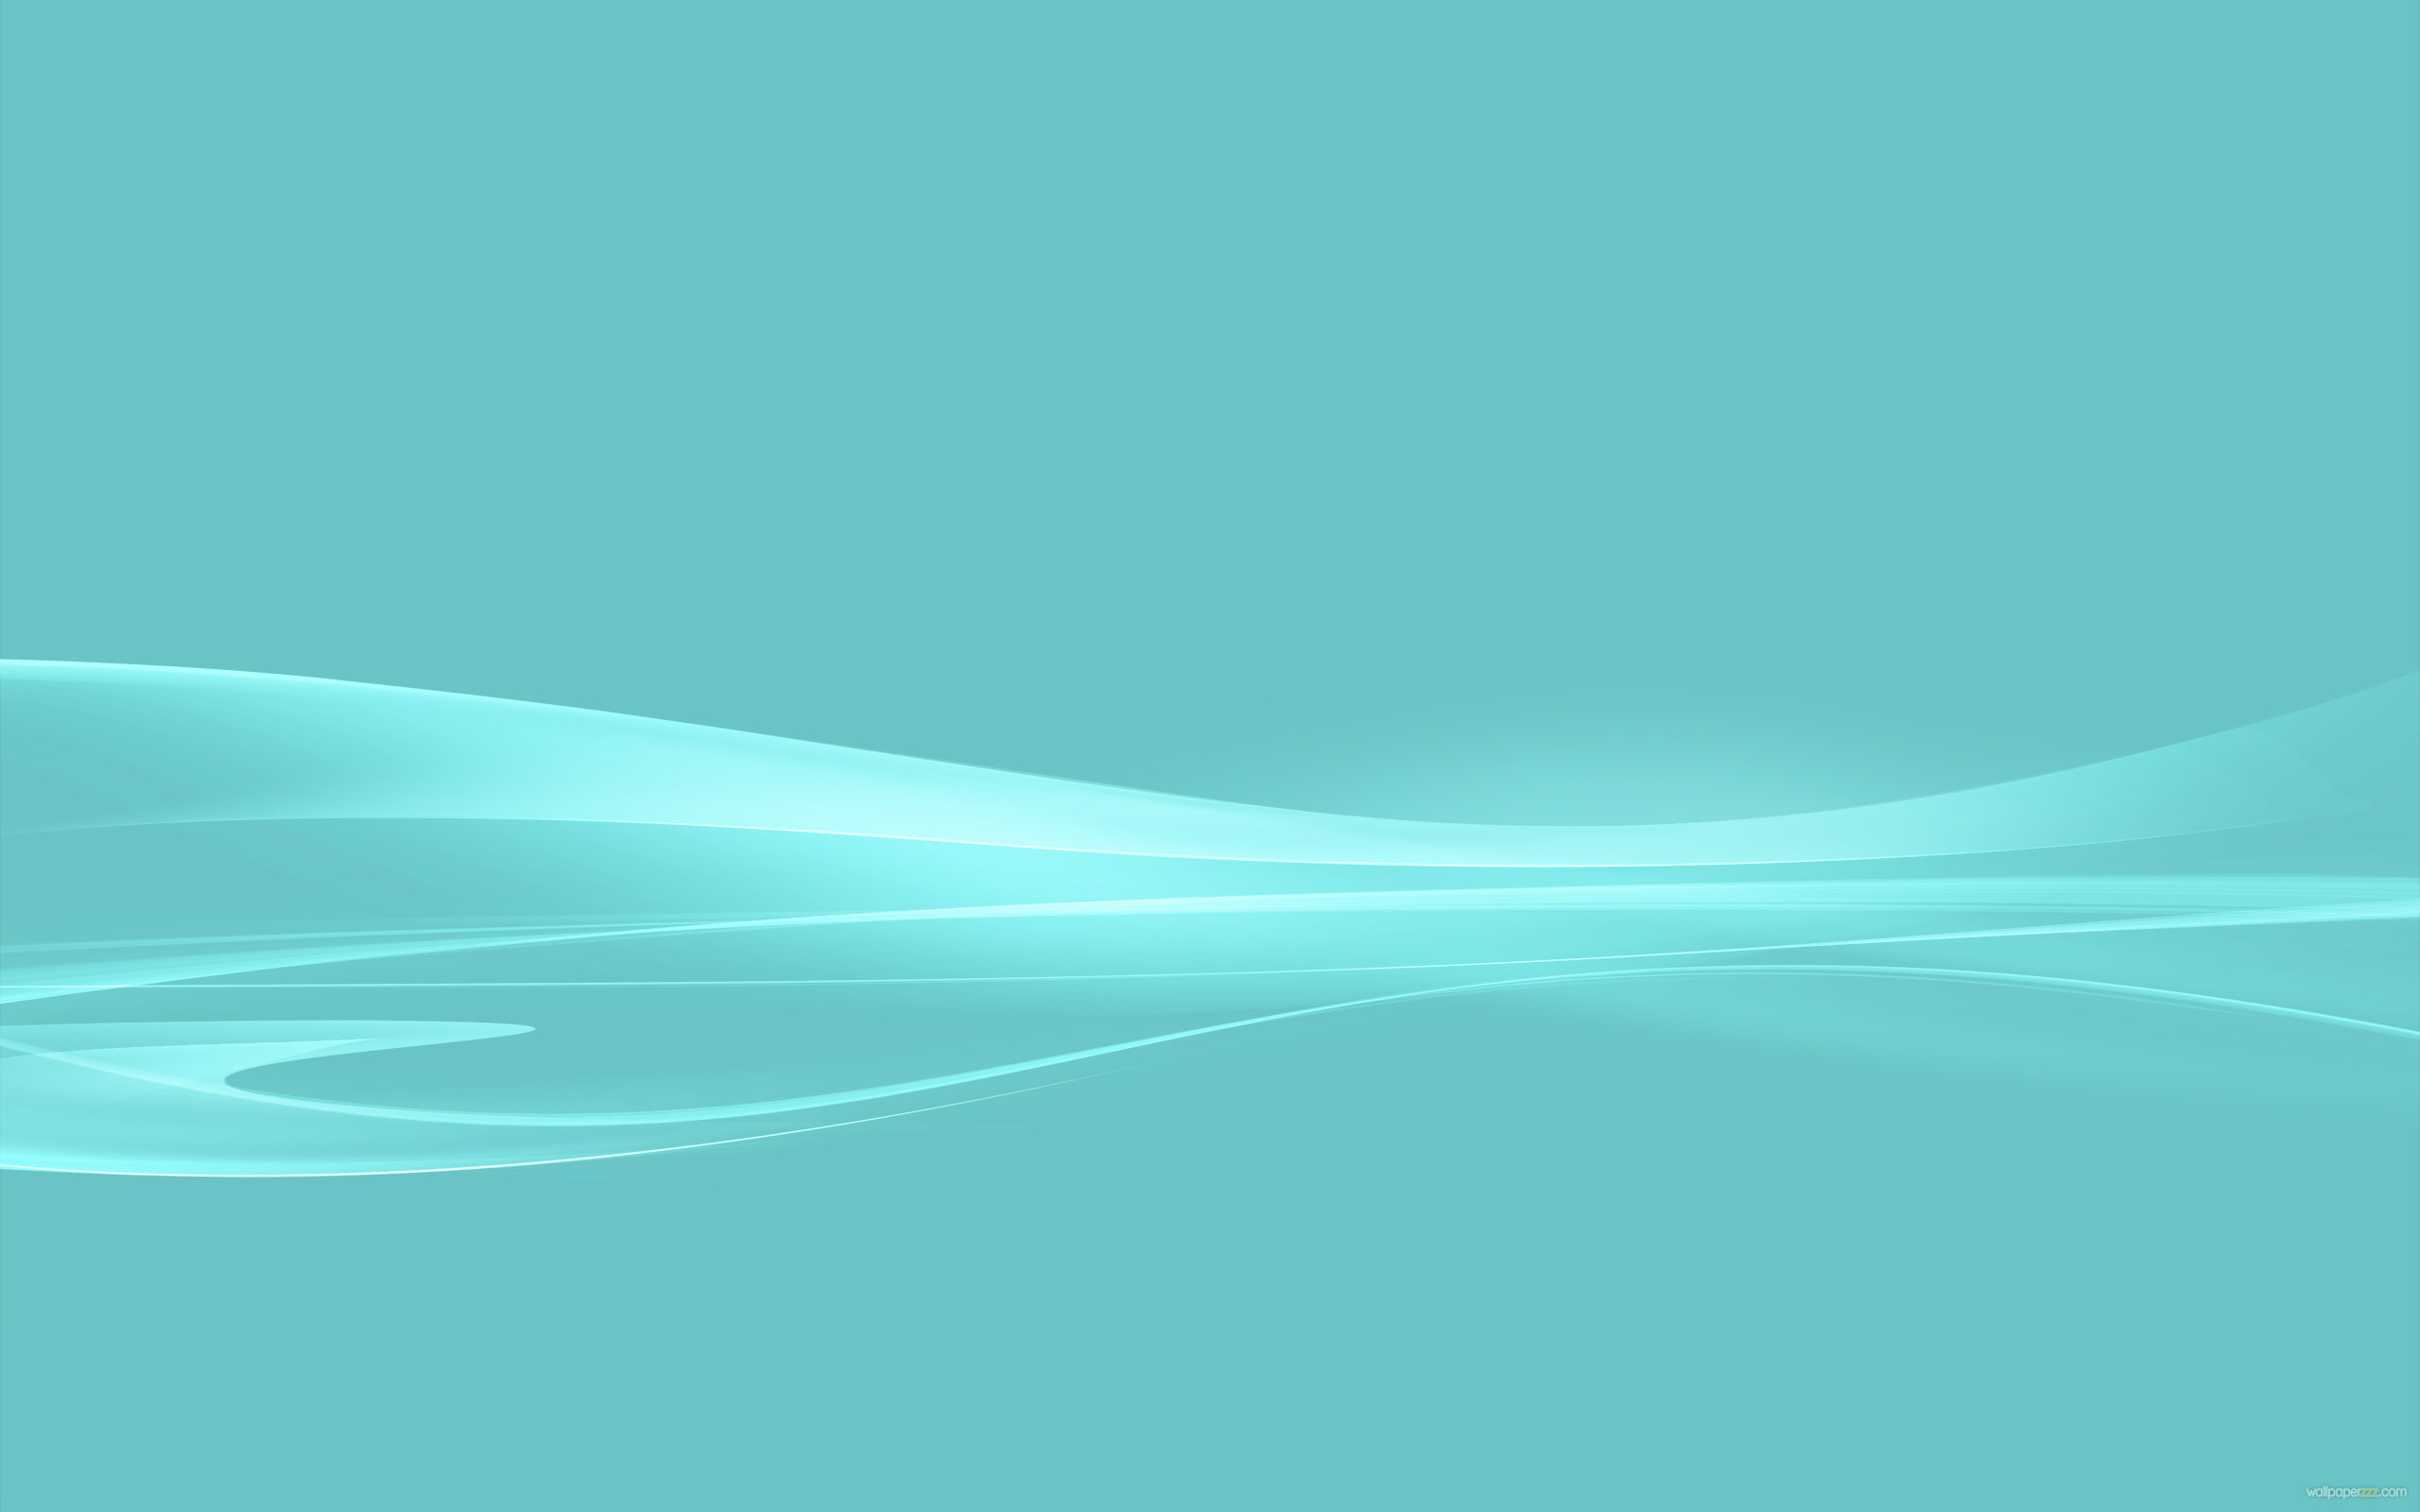  Wallpaper related pictures blue minimalistic backgrounds cyan